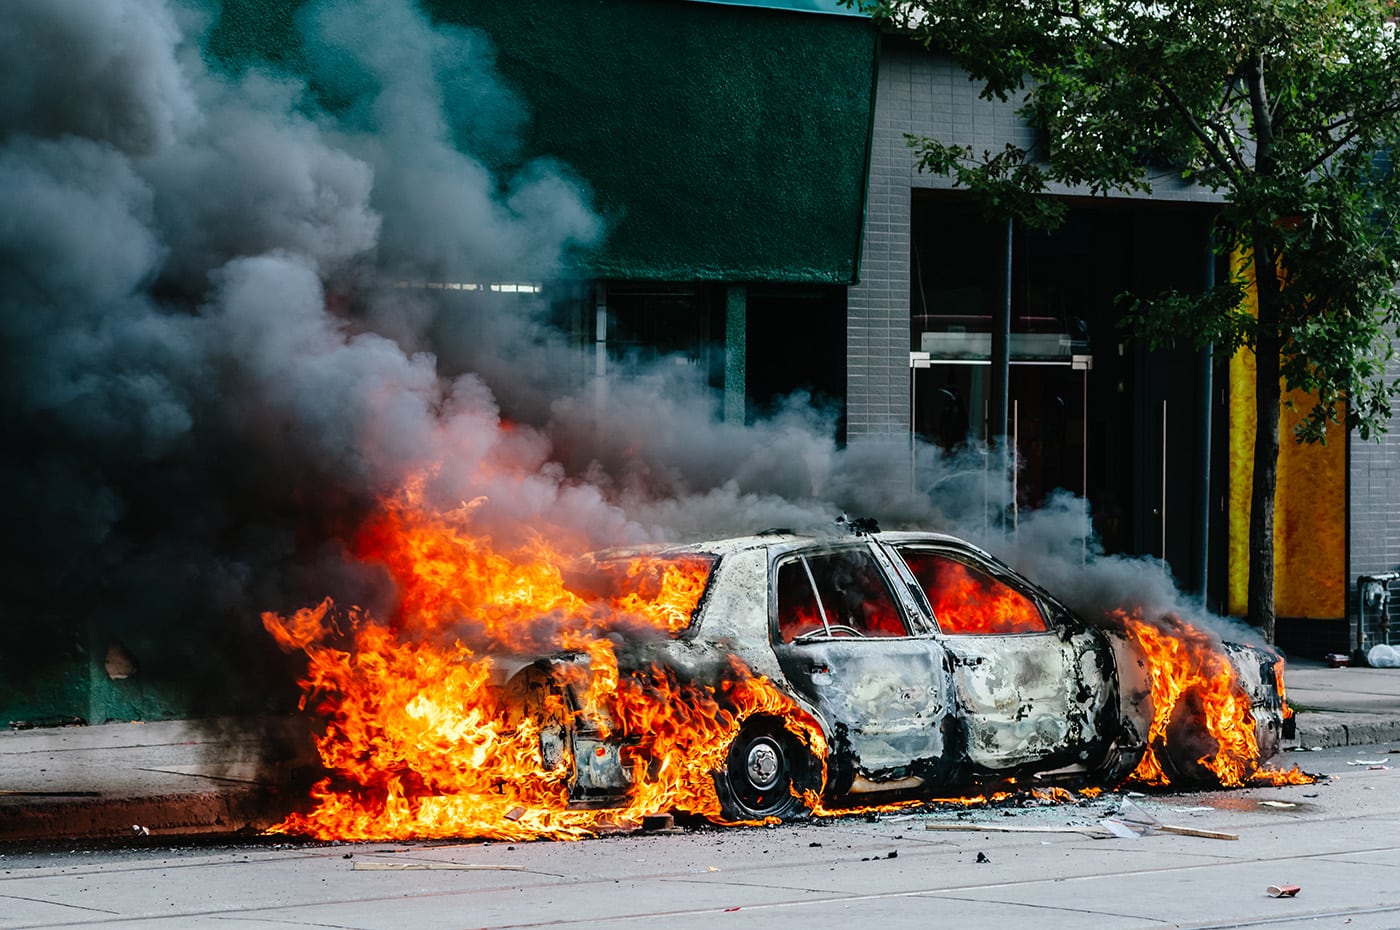 A police car was lit on fire during a protest in Toronto, Canada. Here the fire is still burning but the vehicle is no longer recognizable.